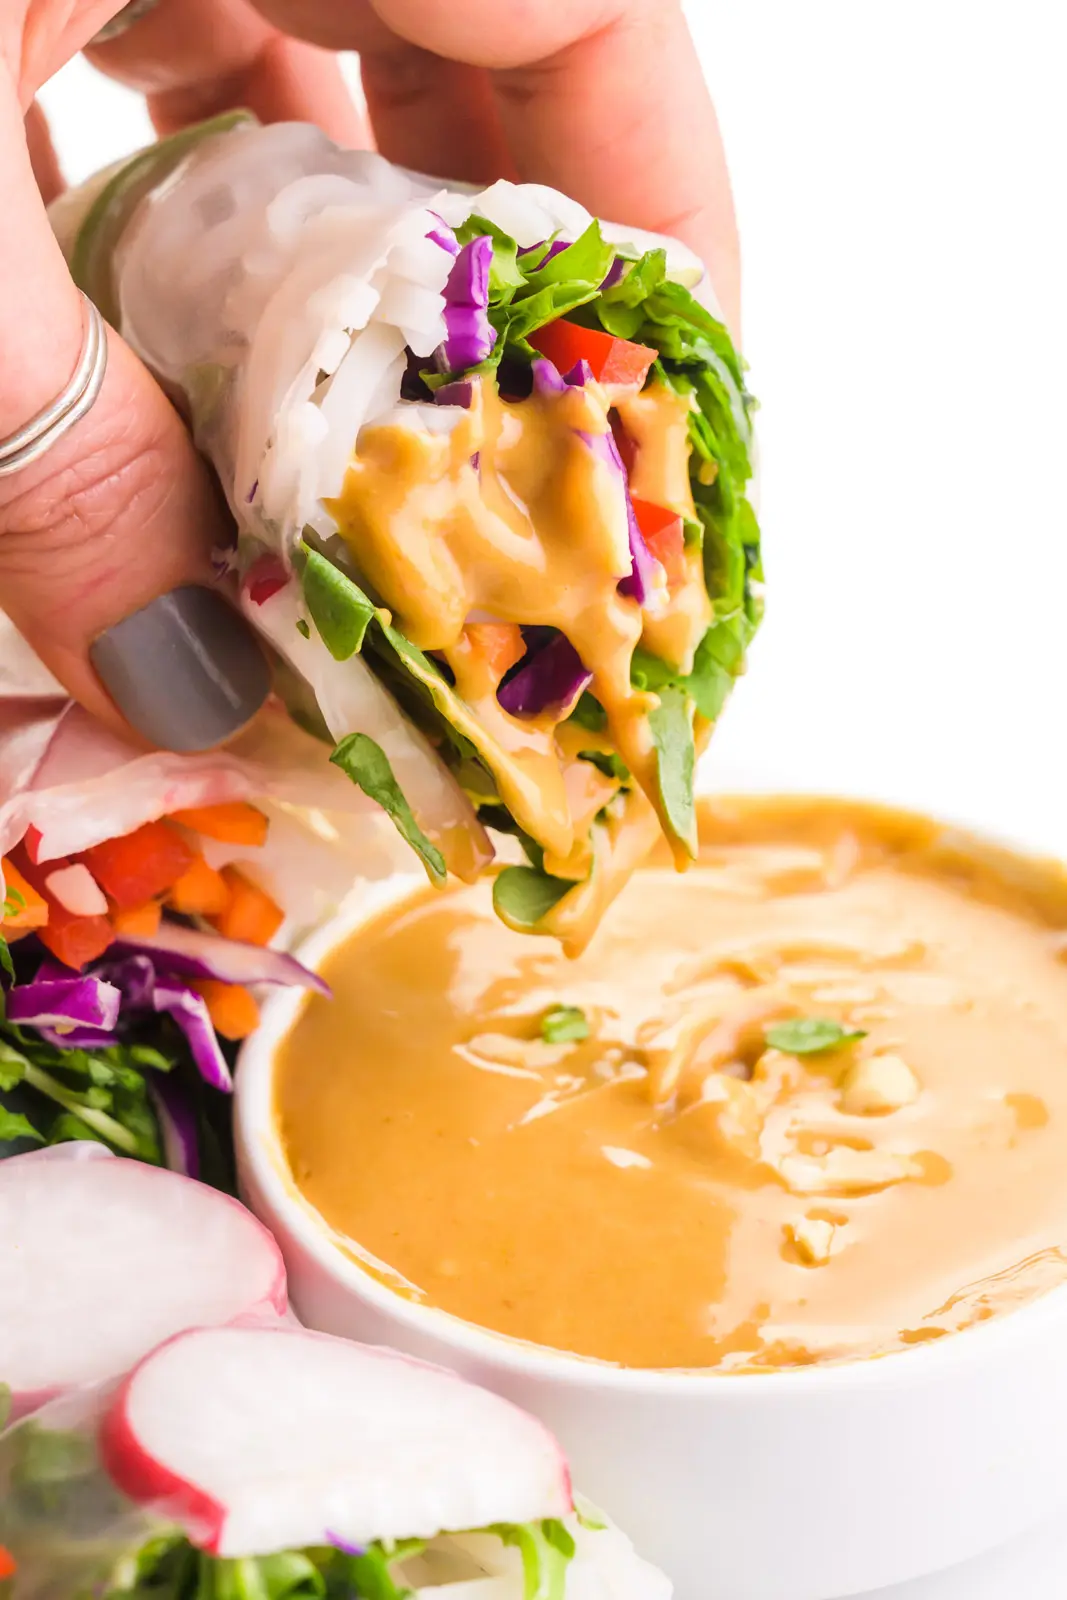 A hand holds a spring roll recently dipped in peanut sauce. There are more spring rolls around it.